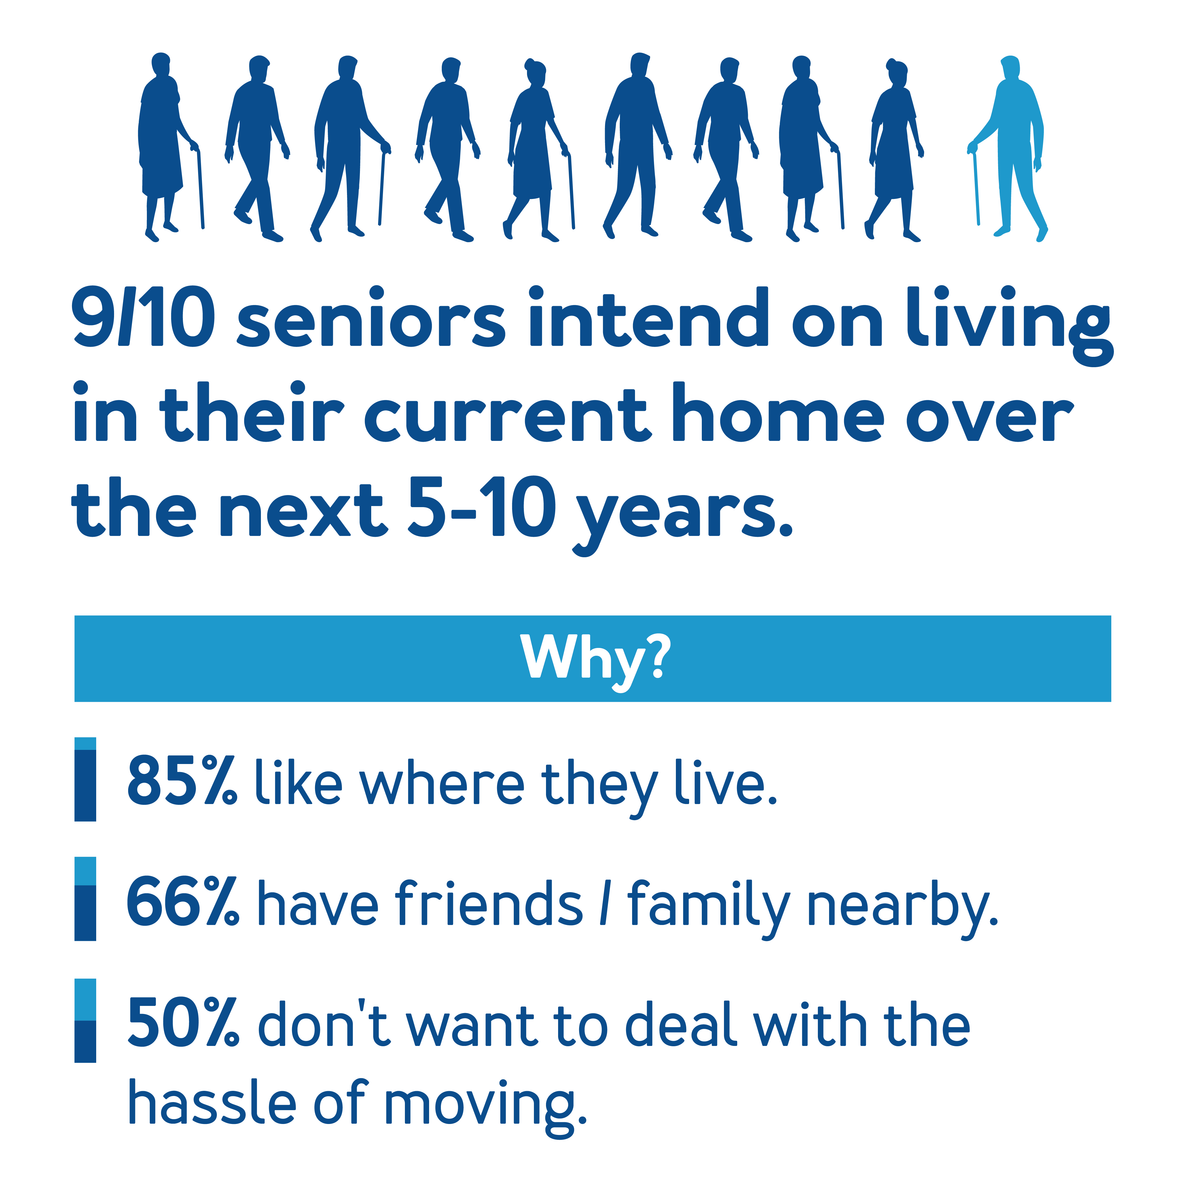 A graphic of people showing that 9/10 seniors intend to live , Further details are provided below